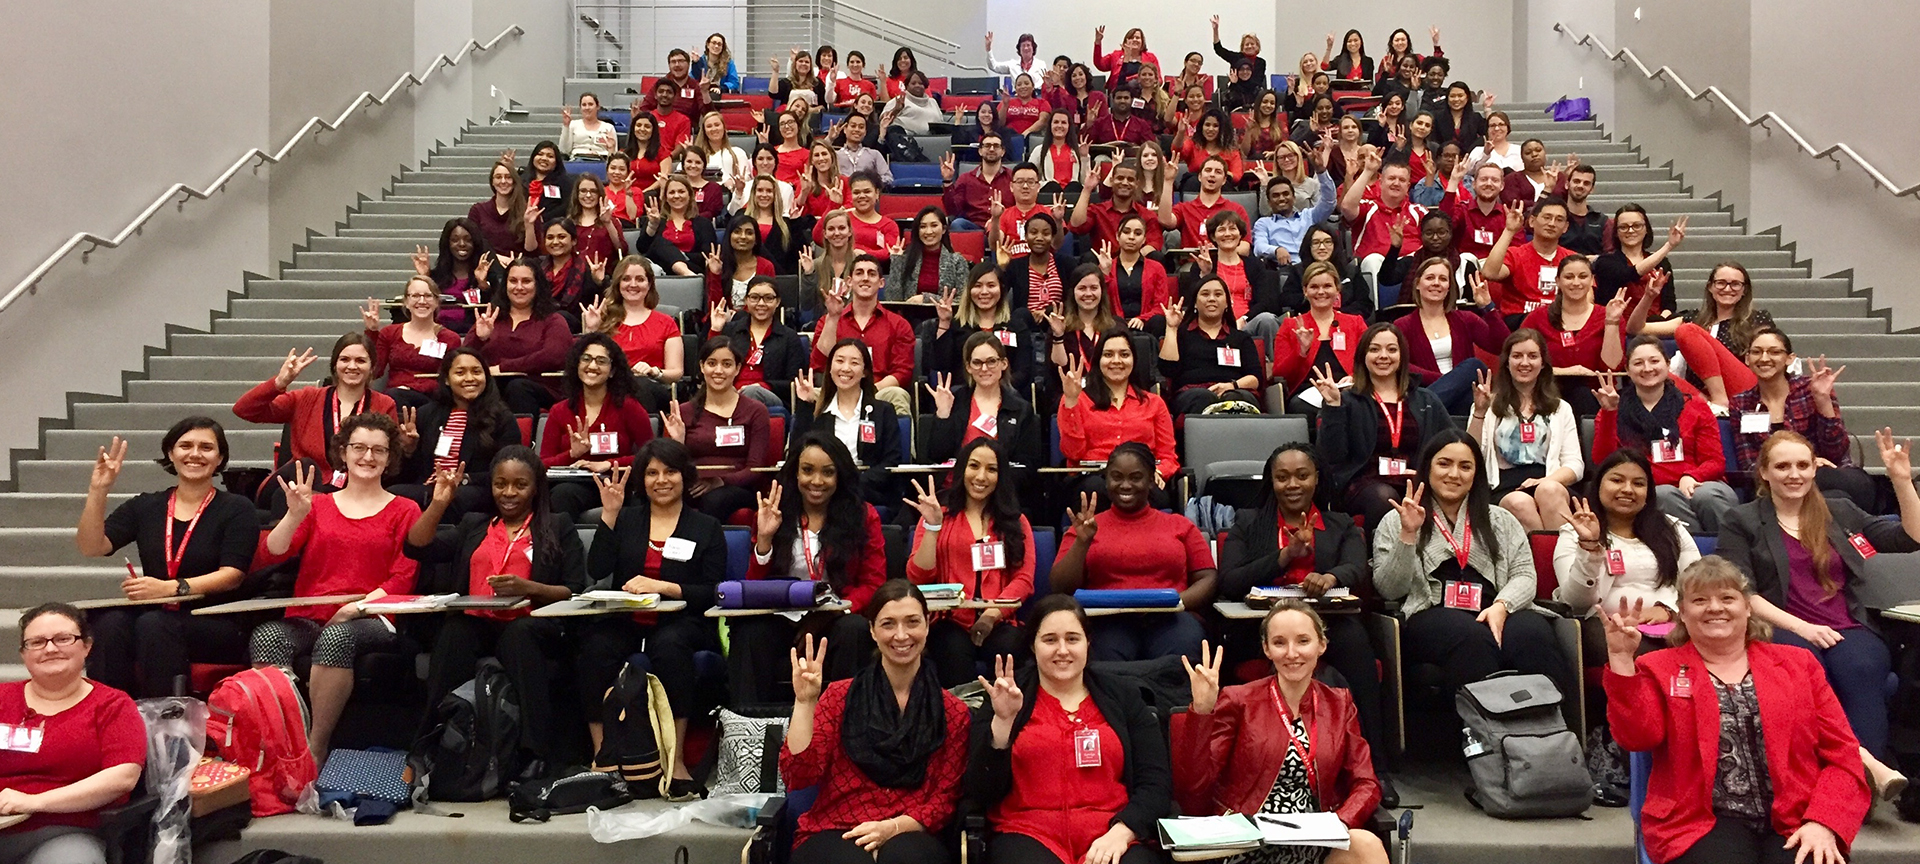 Nursing faculty and students sitting together in an auditorium